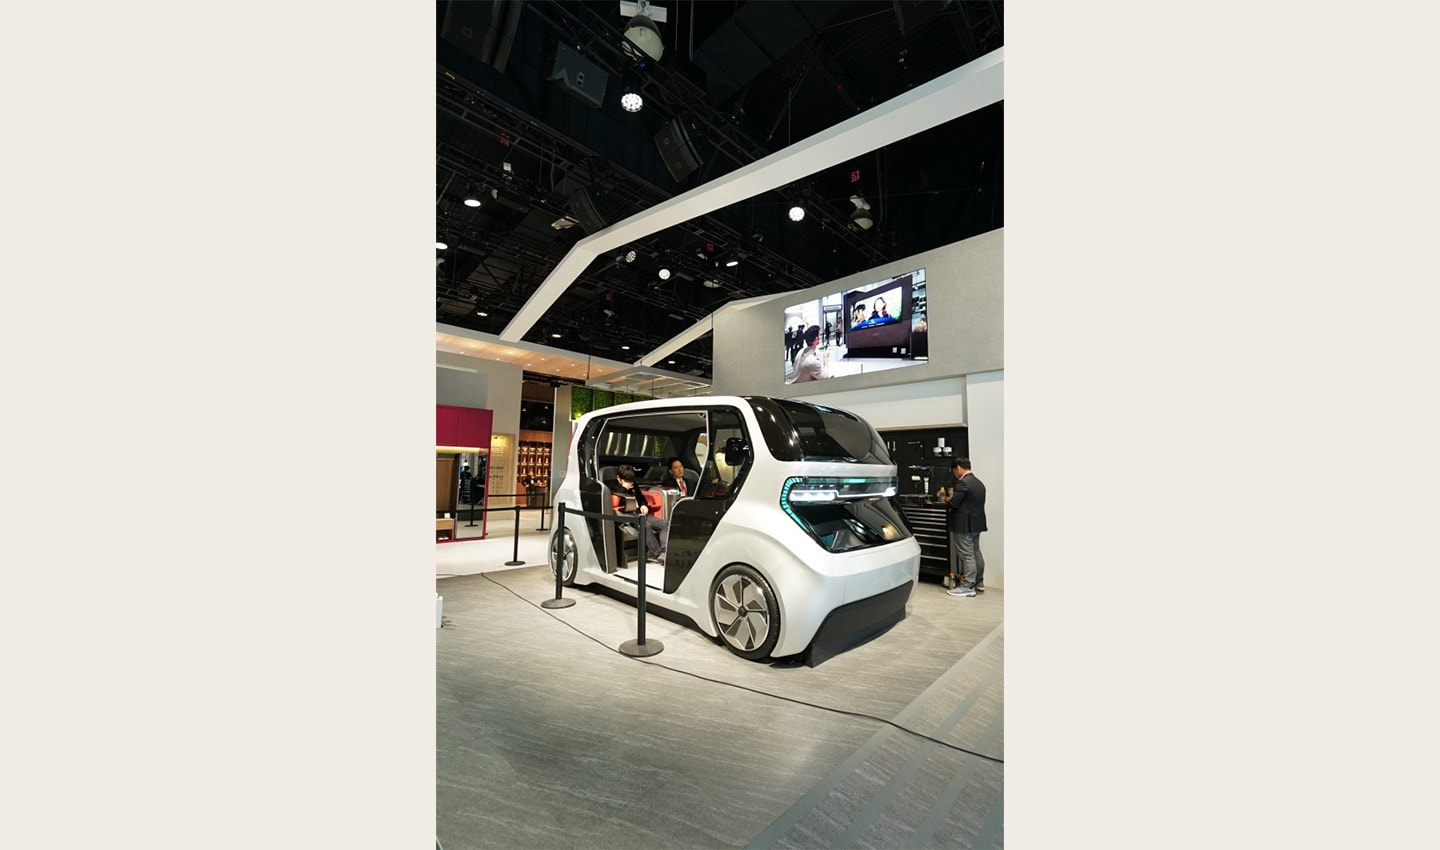 A front side view of LG’s Connected Car concept with two people sitting inside, which was unveiled at CES 2020 to highlight the future of cars via LG ThinQ